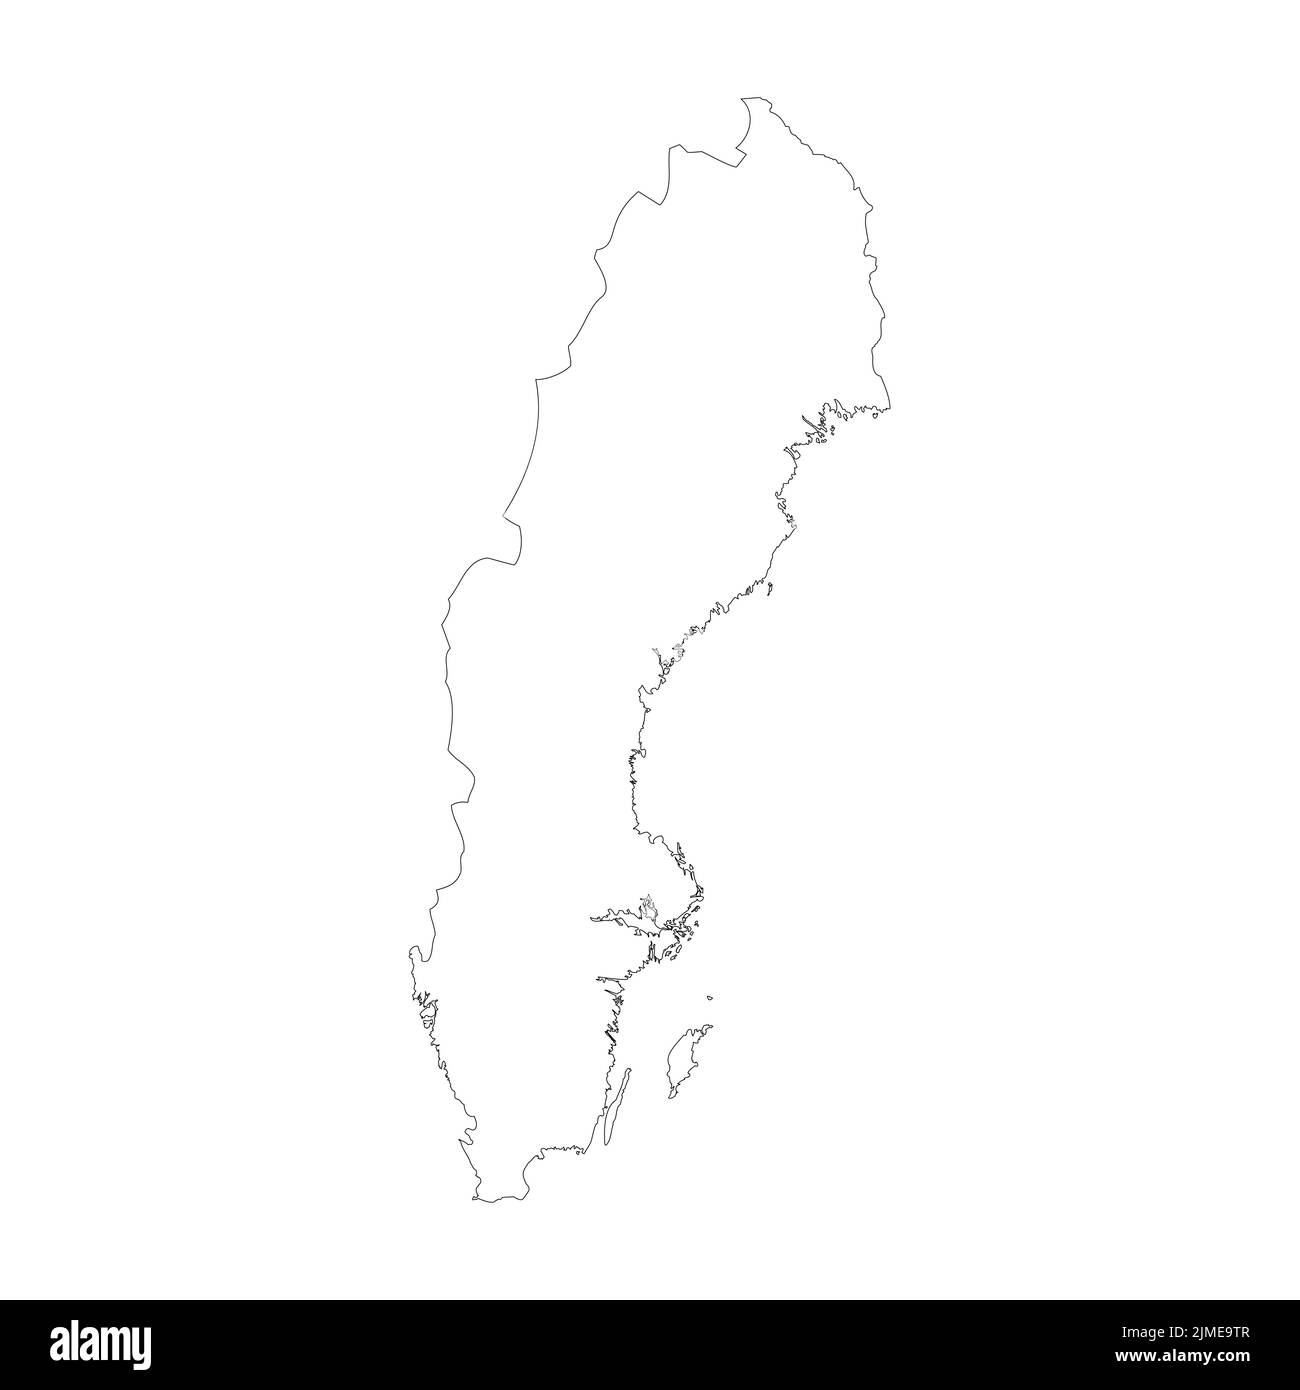 Sweden vector country map outline Stock Vector